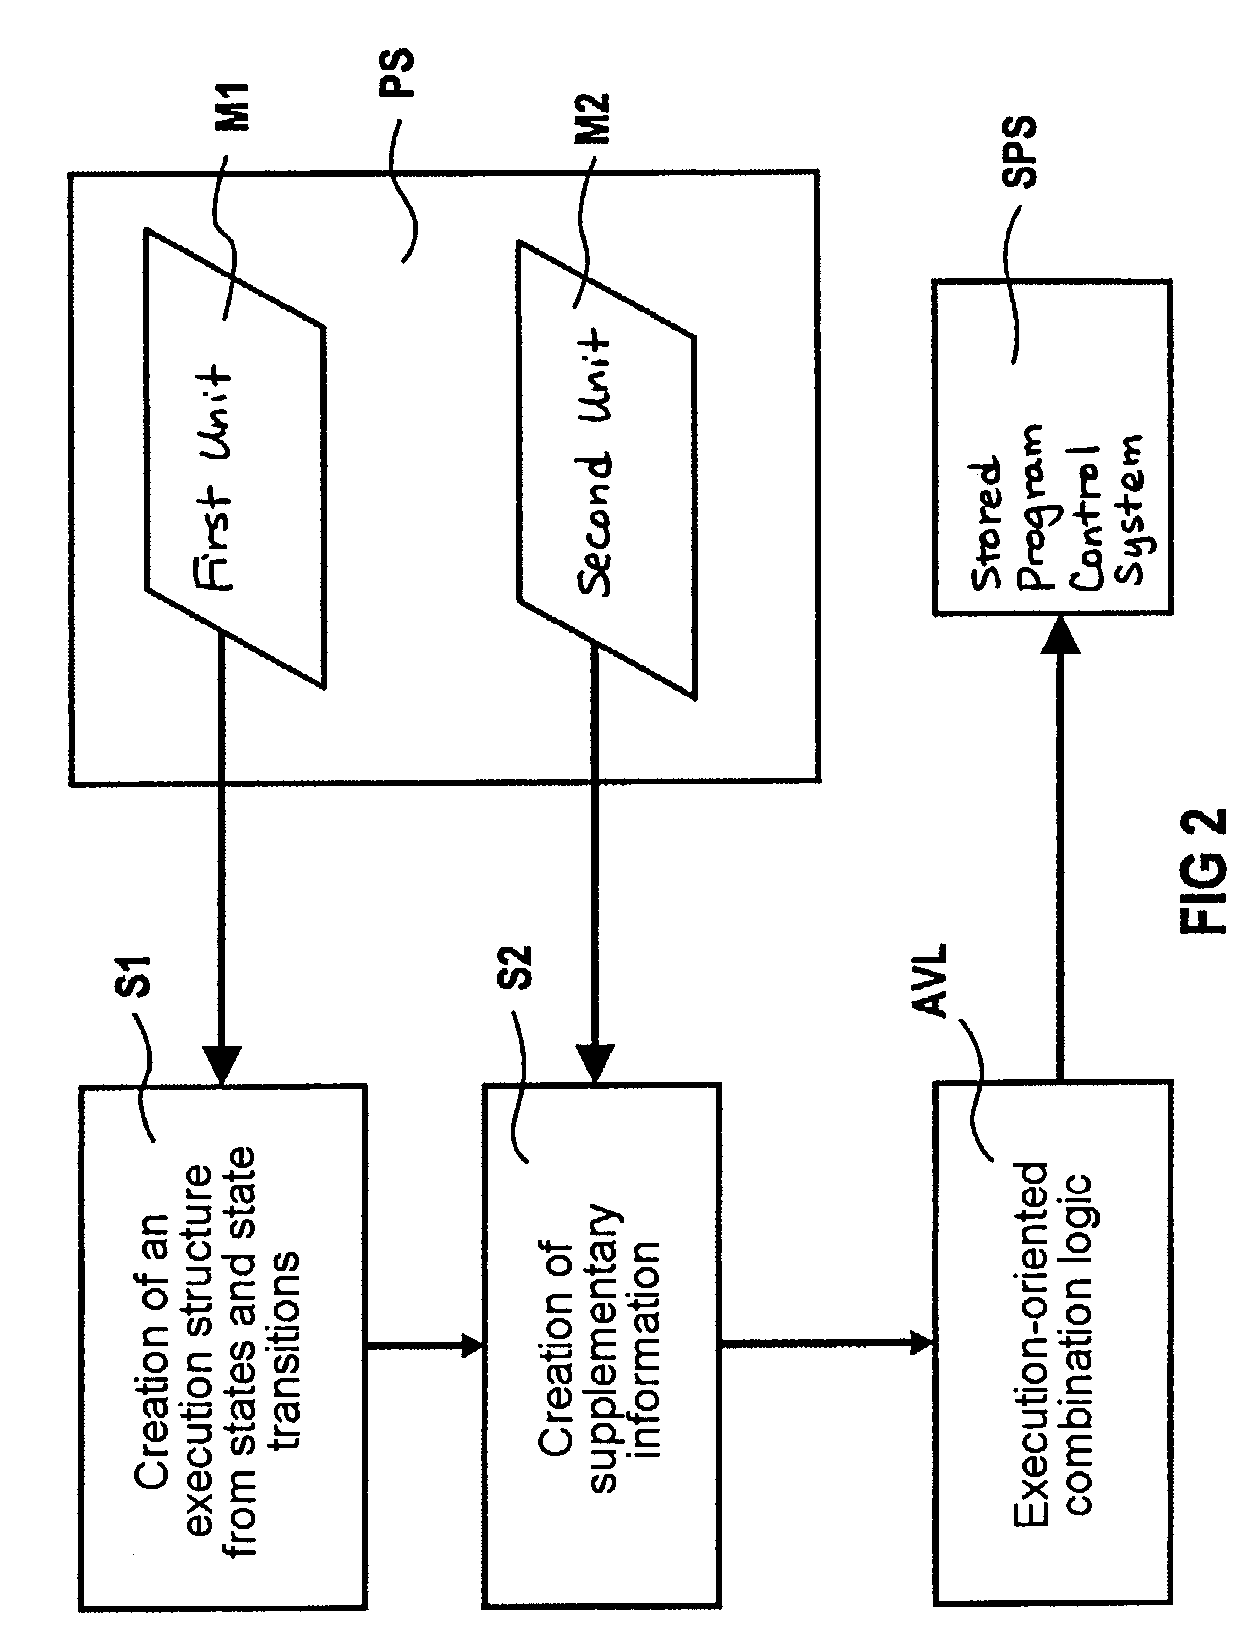 System and method for programming and/or operating an automation system with execution-oriented combination logic